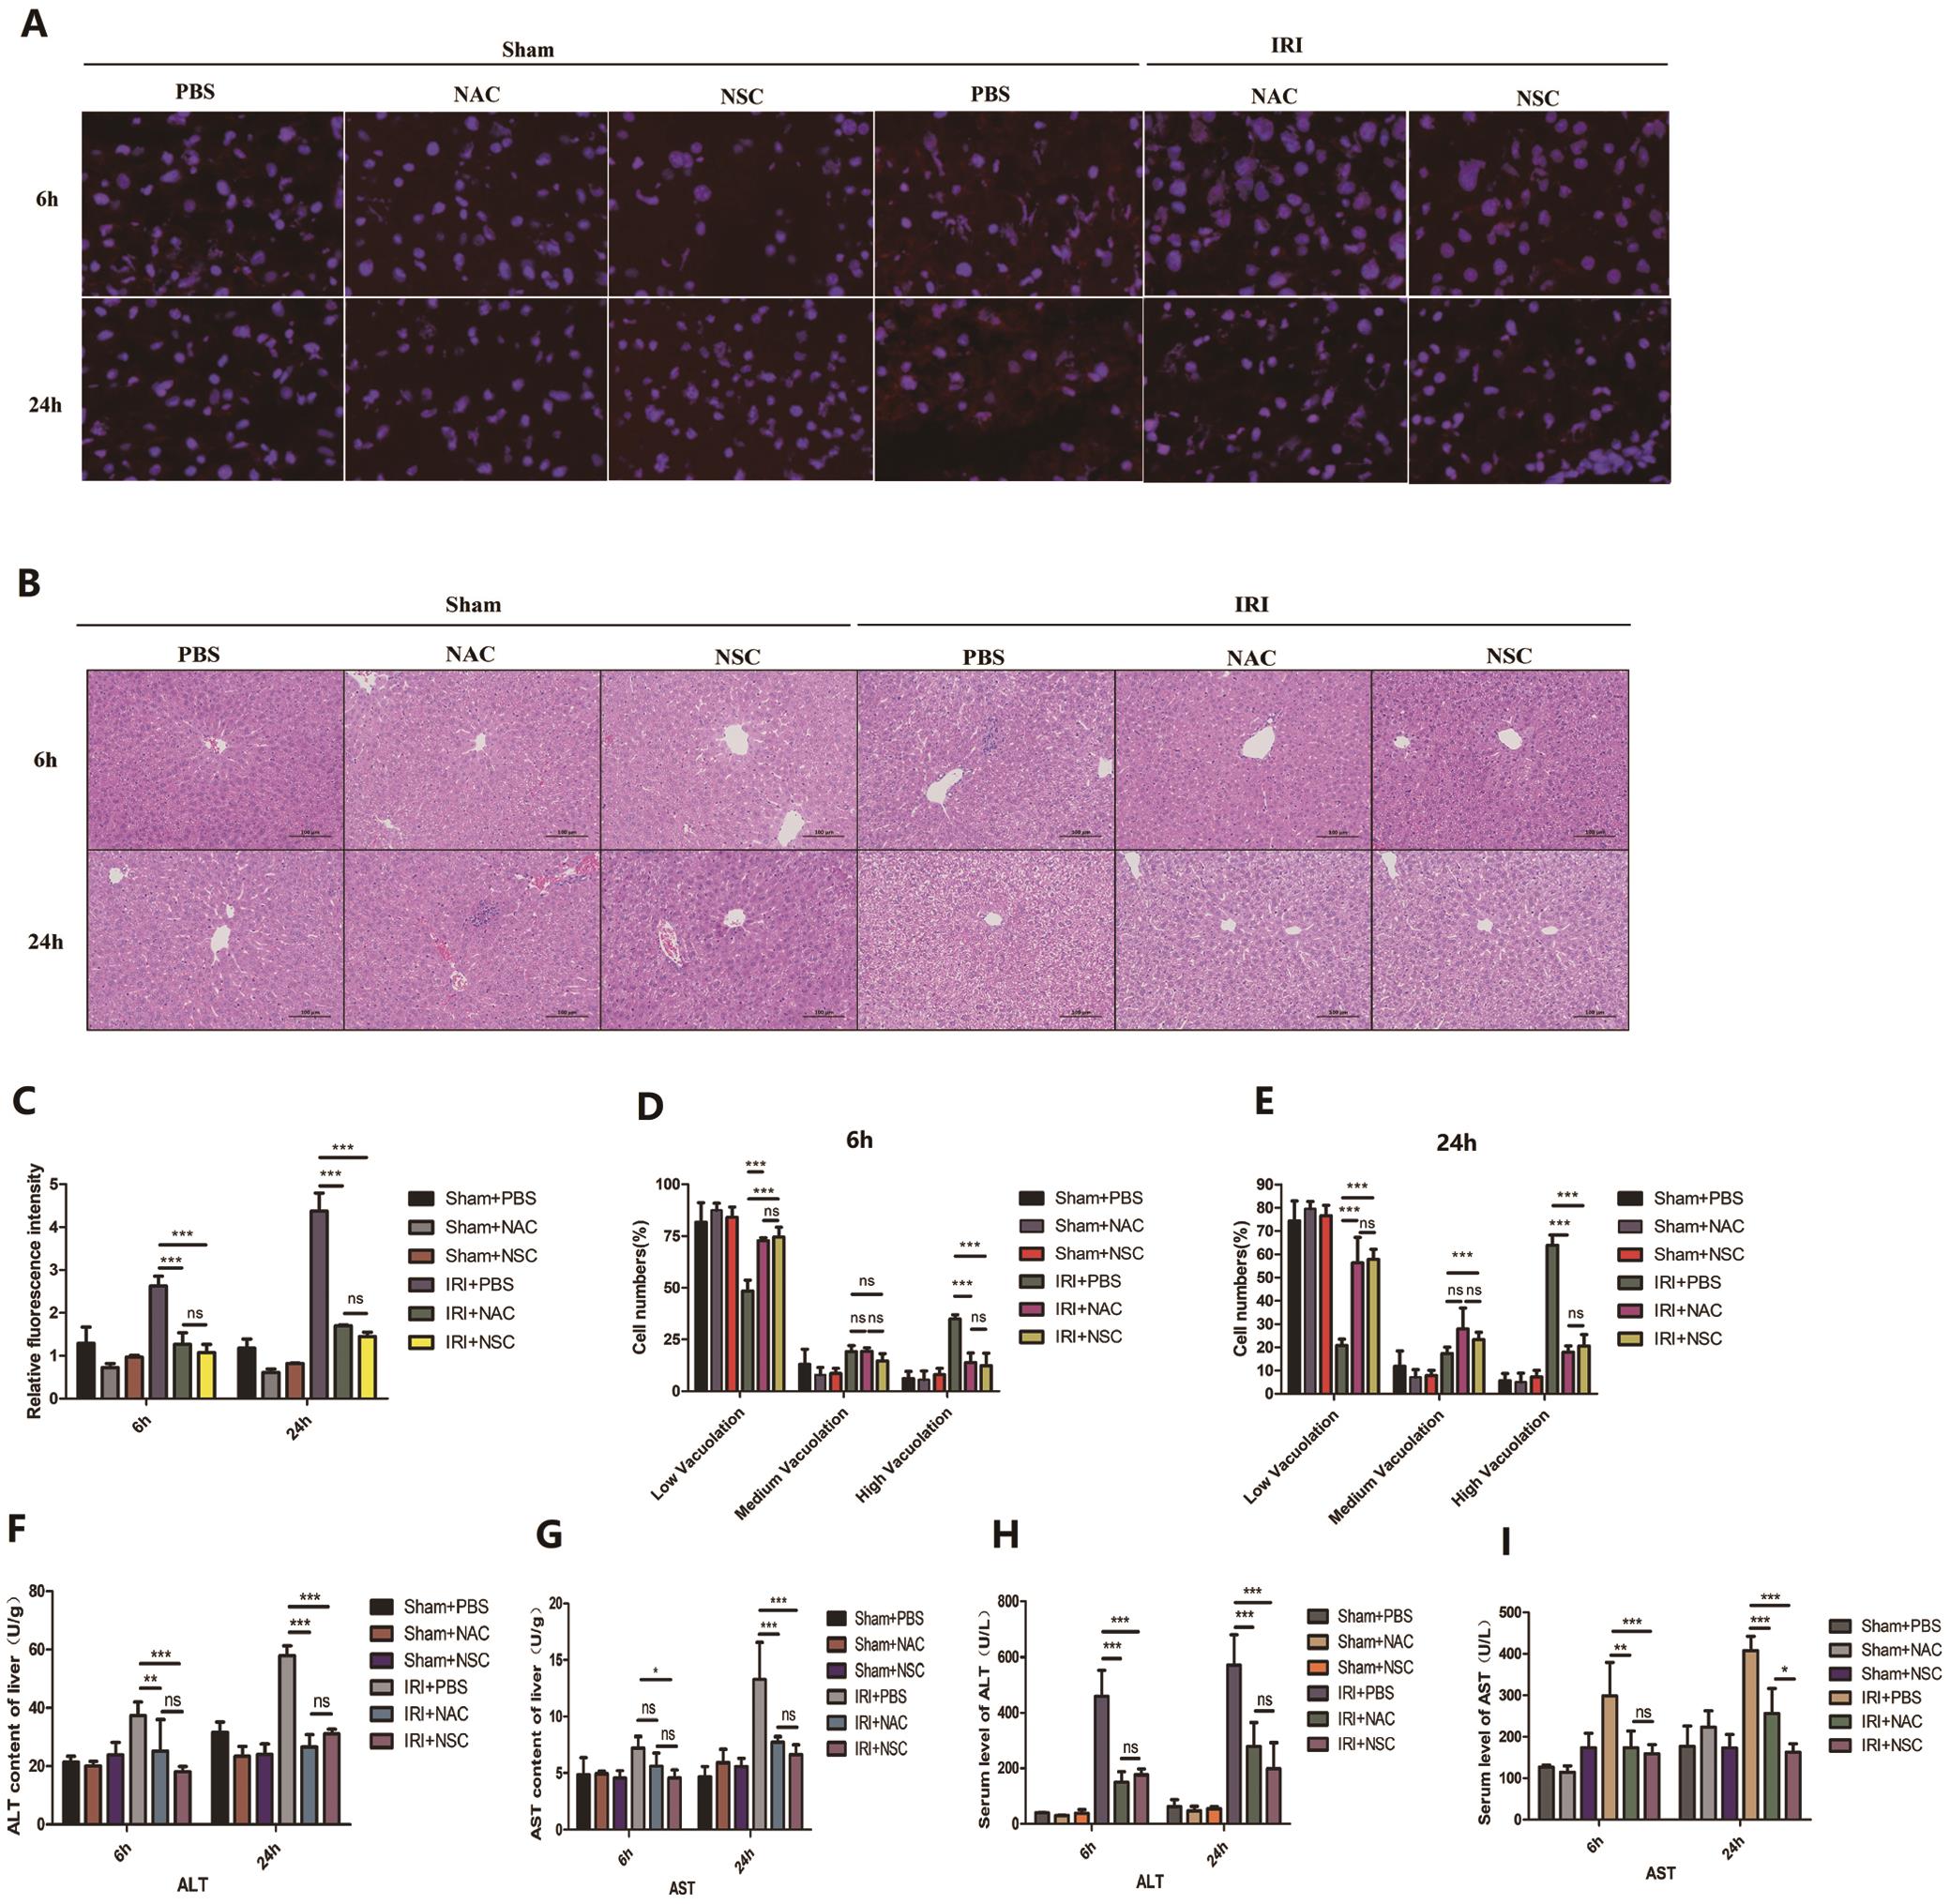 Hepatic IRI in a mouse model was alleviated by Rac1 inhibition.